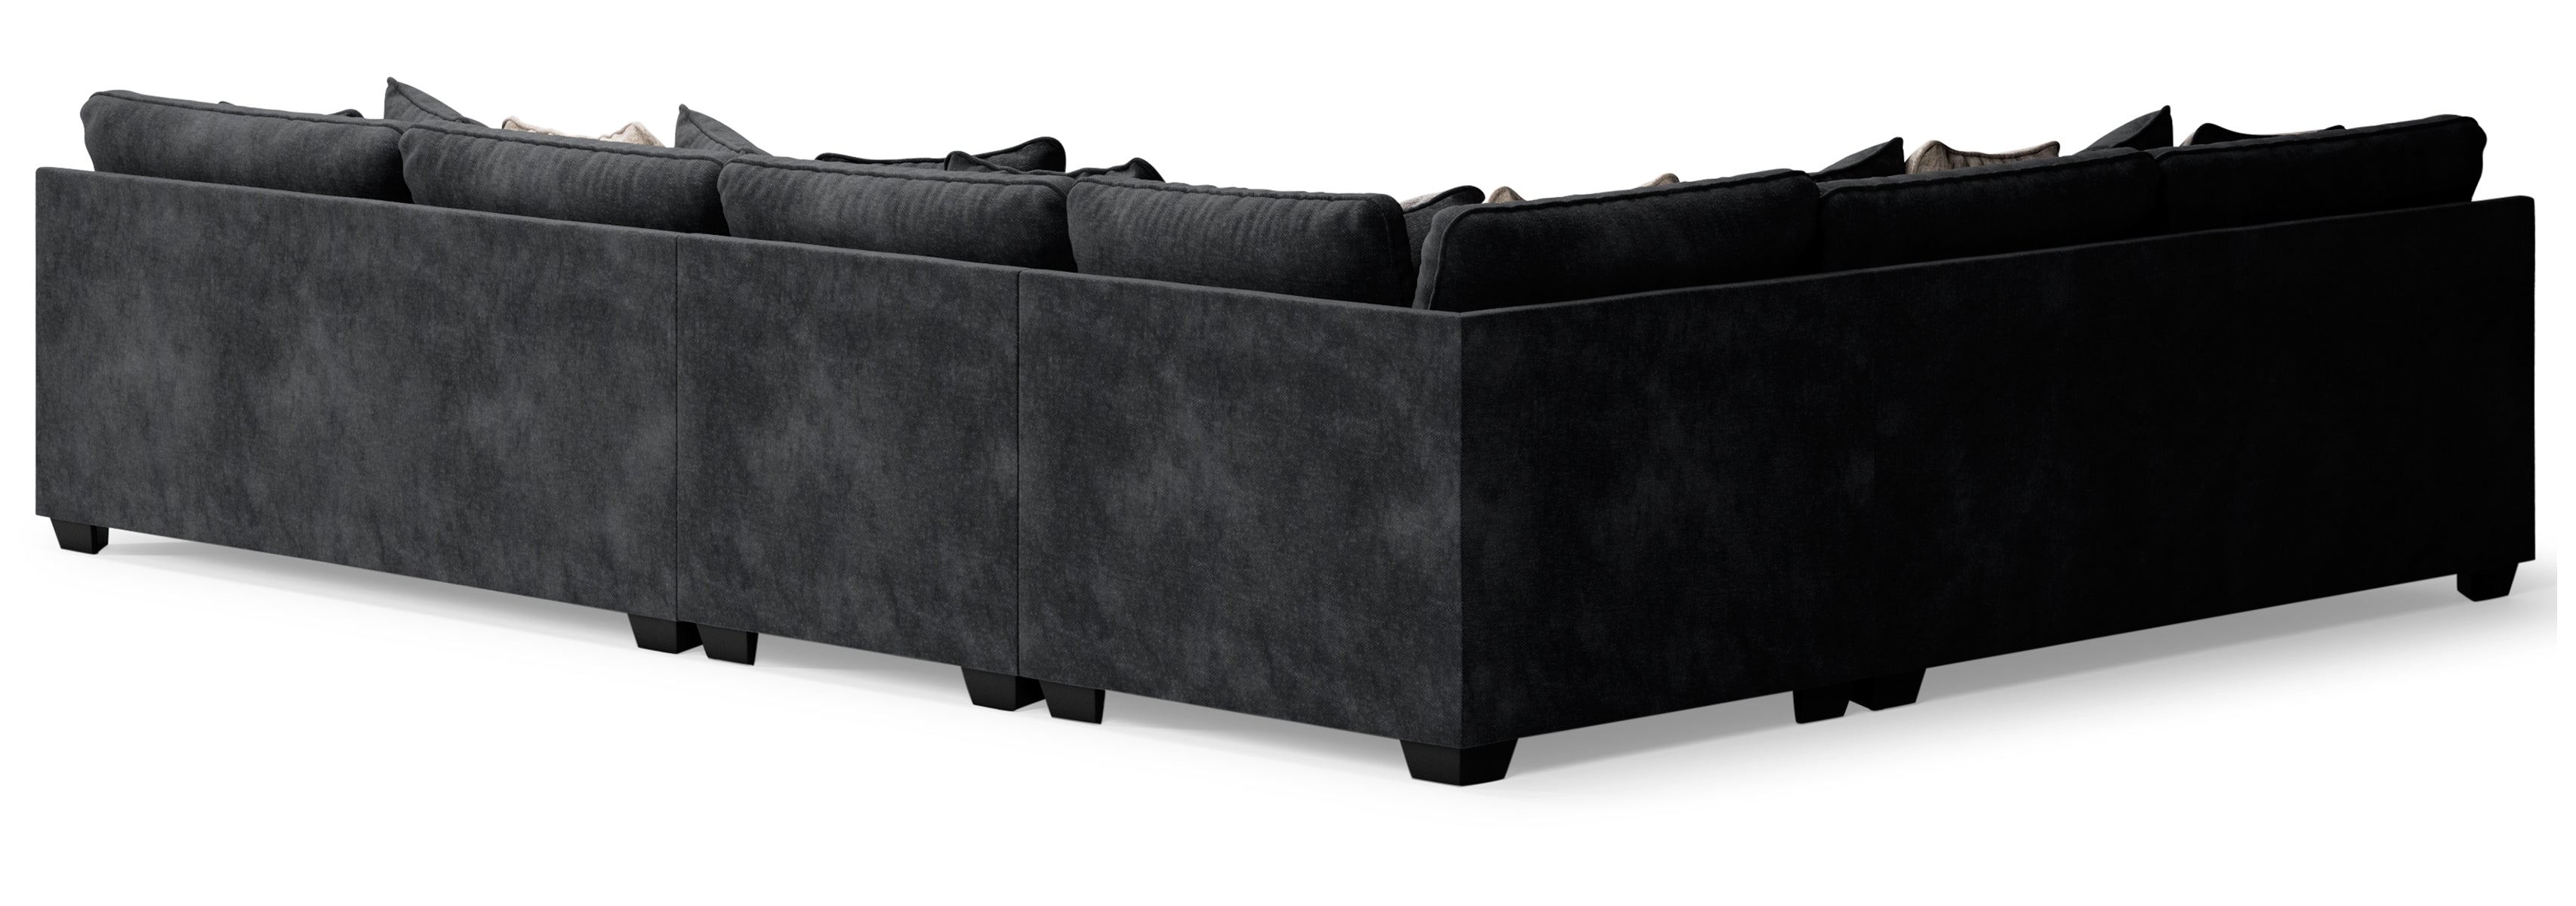 Lavernett 4-Piece Sectional with Ottoman